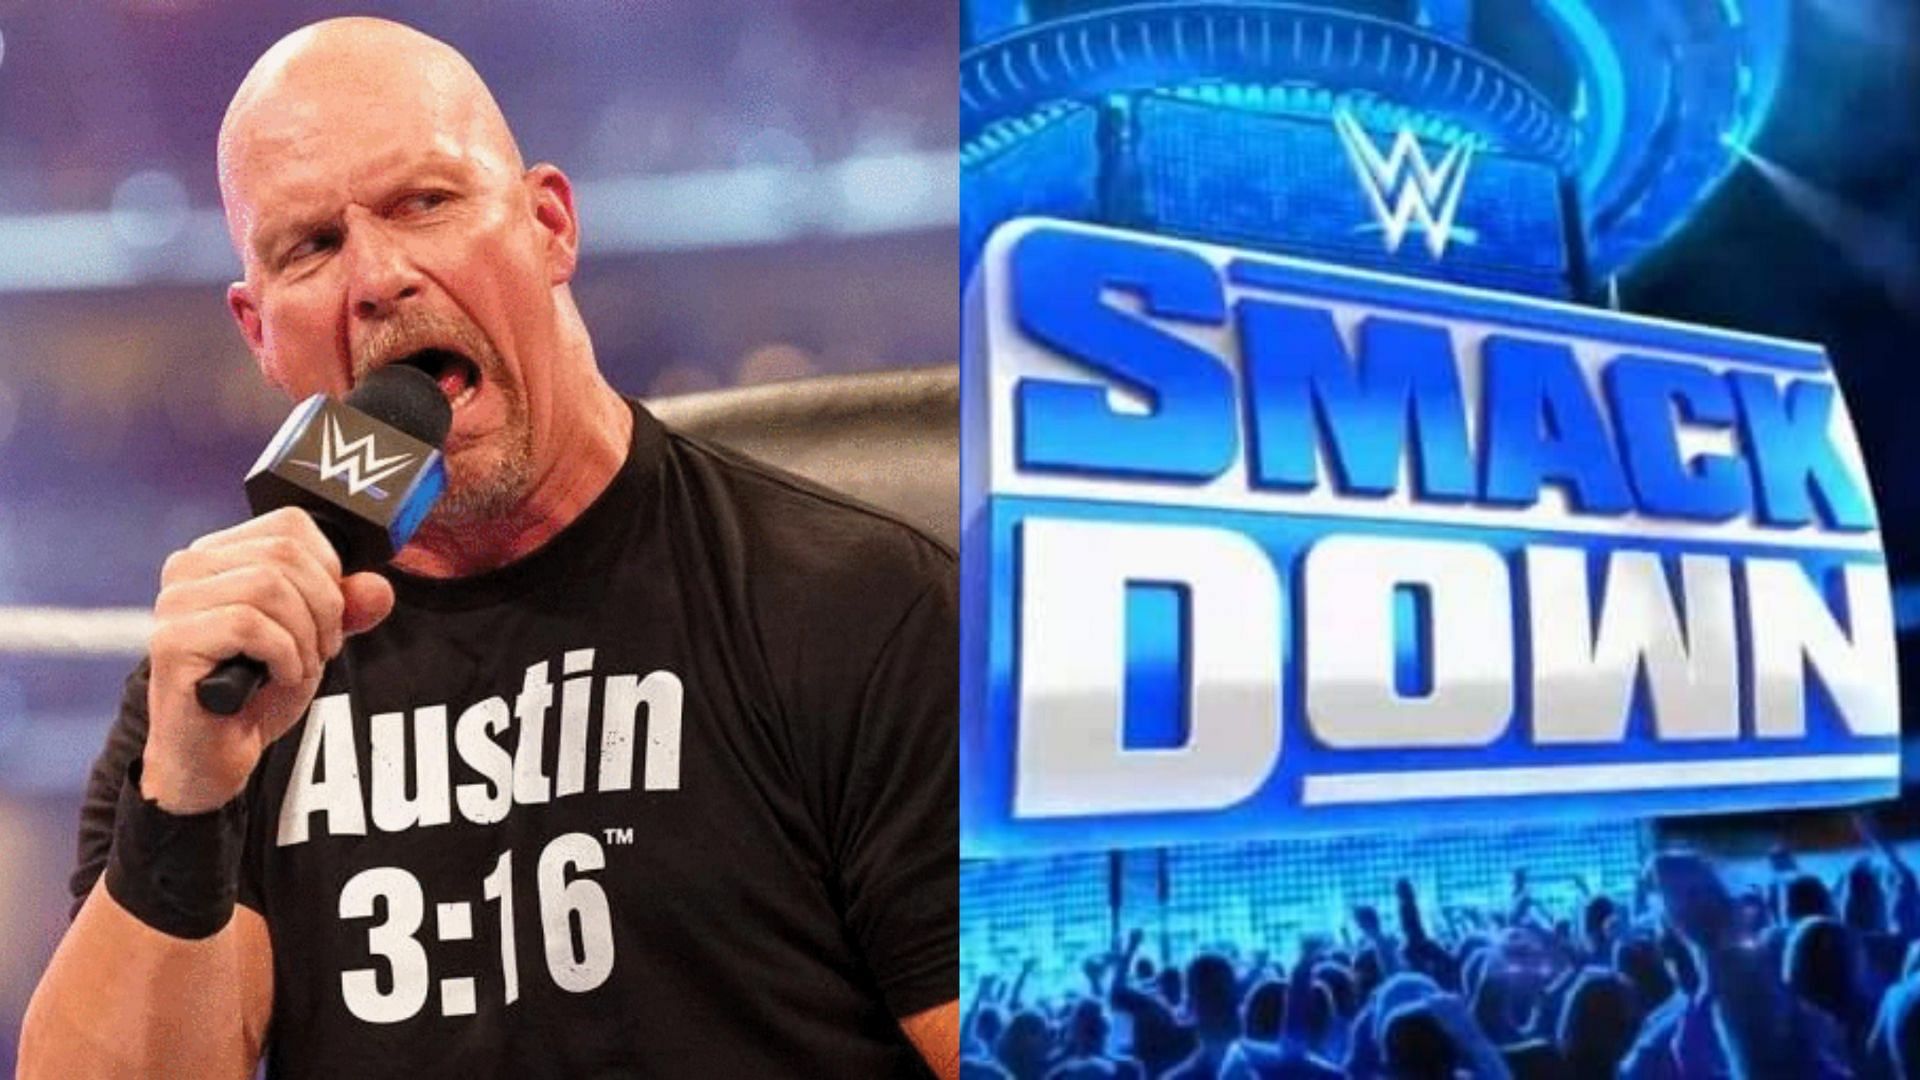 Stone Cold Steve Austin is a 6-time WWE Champion